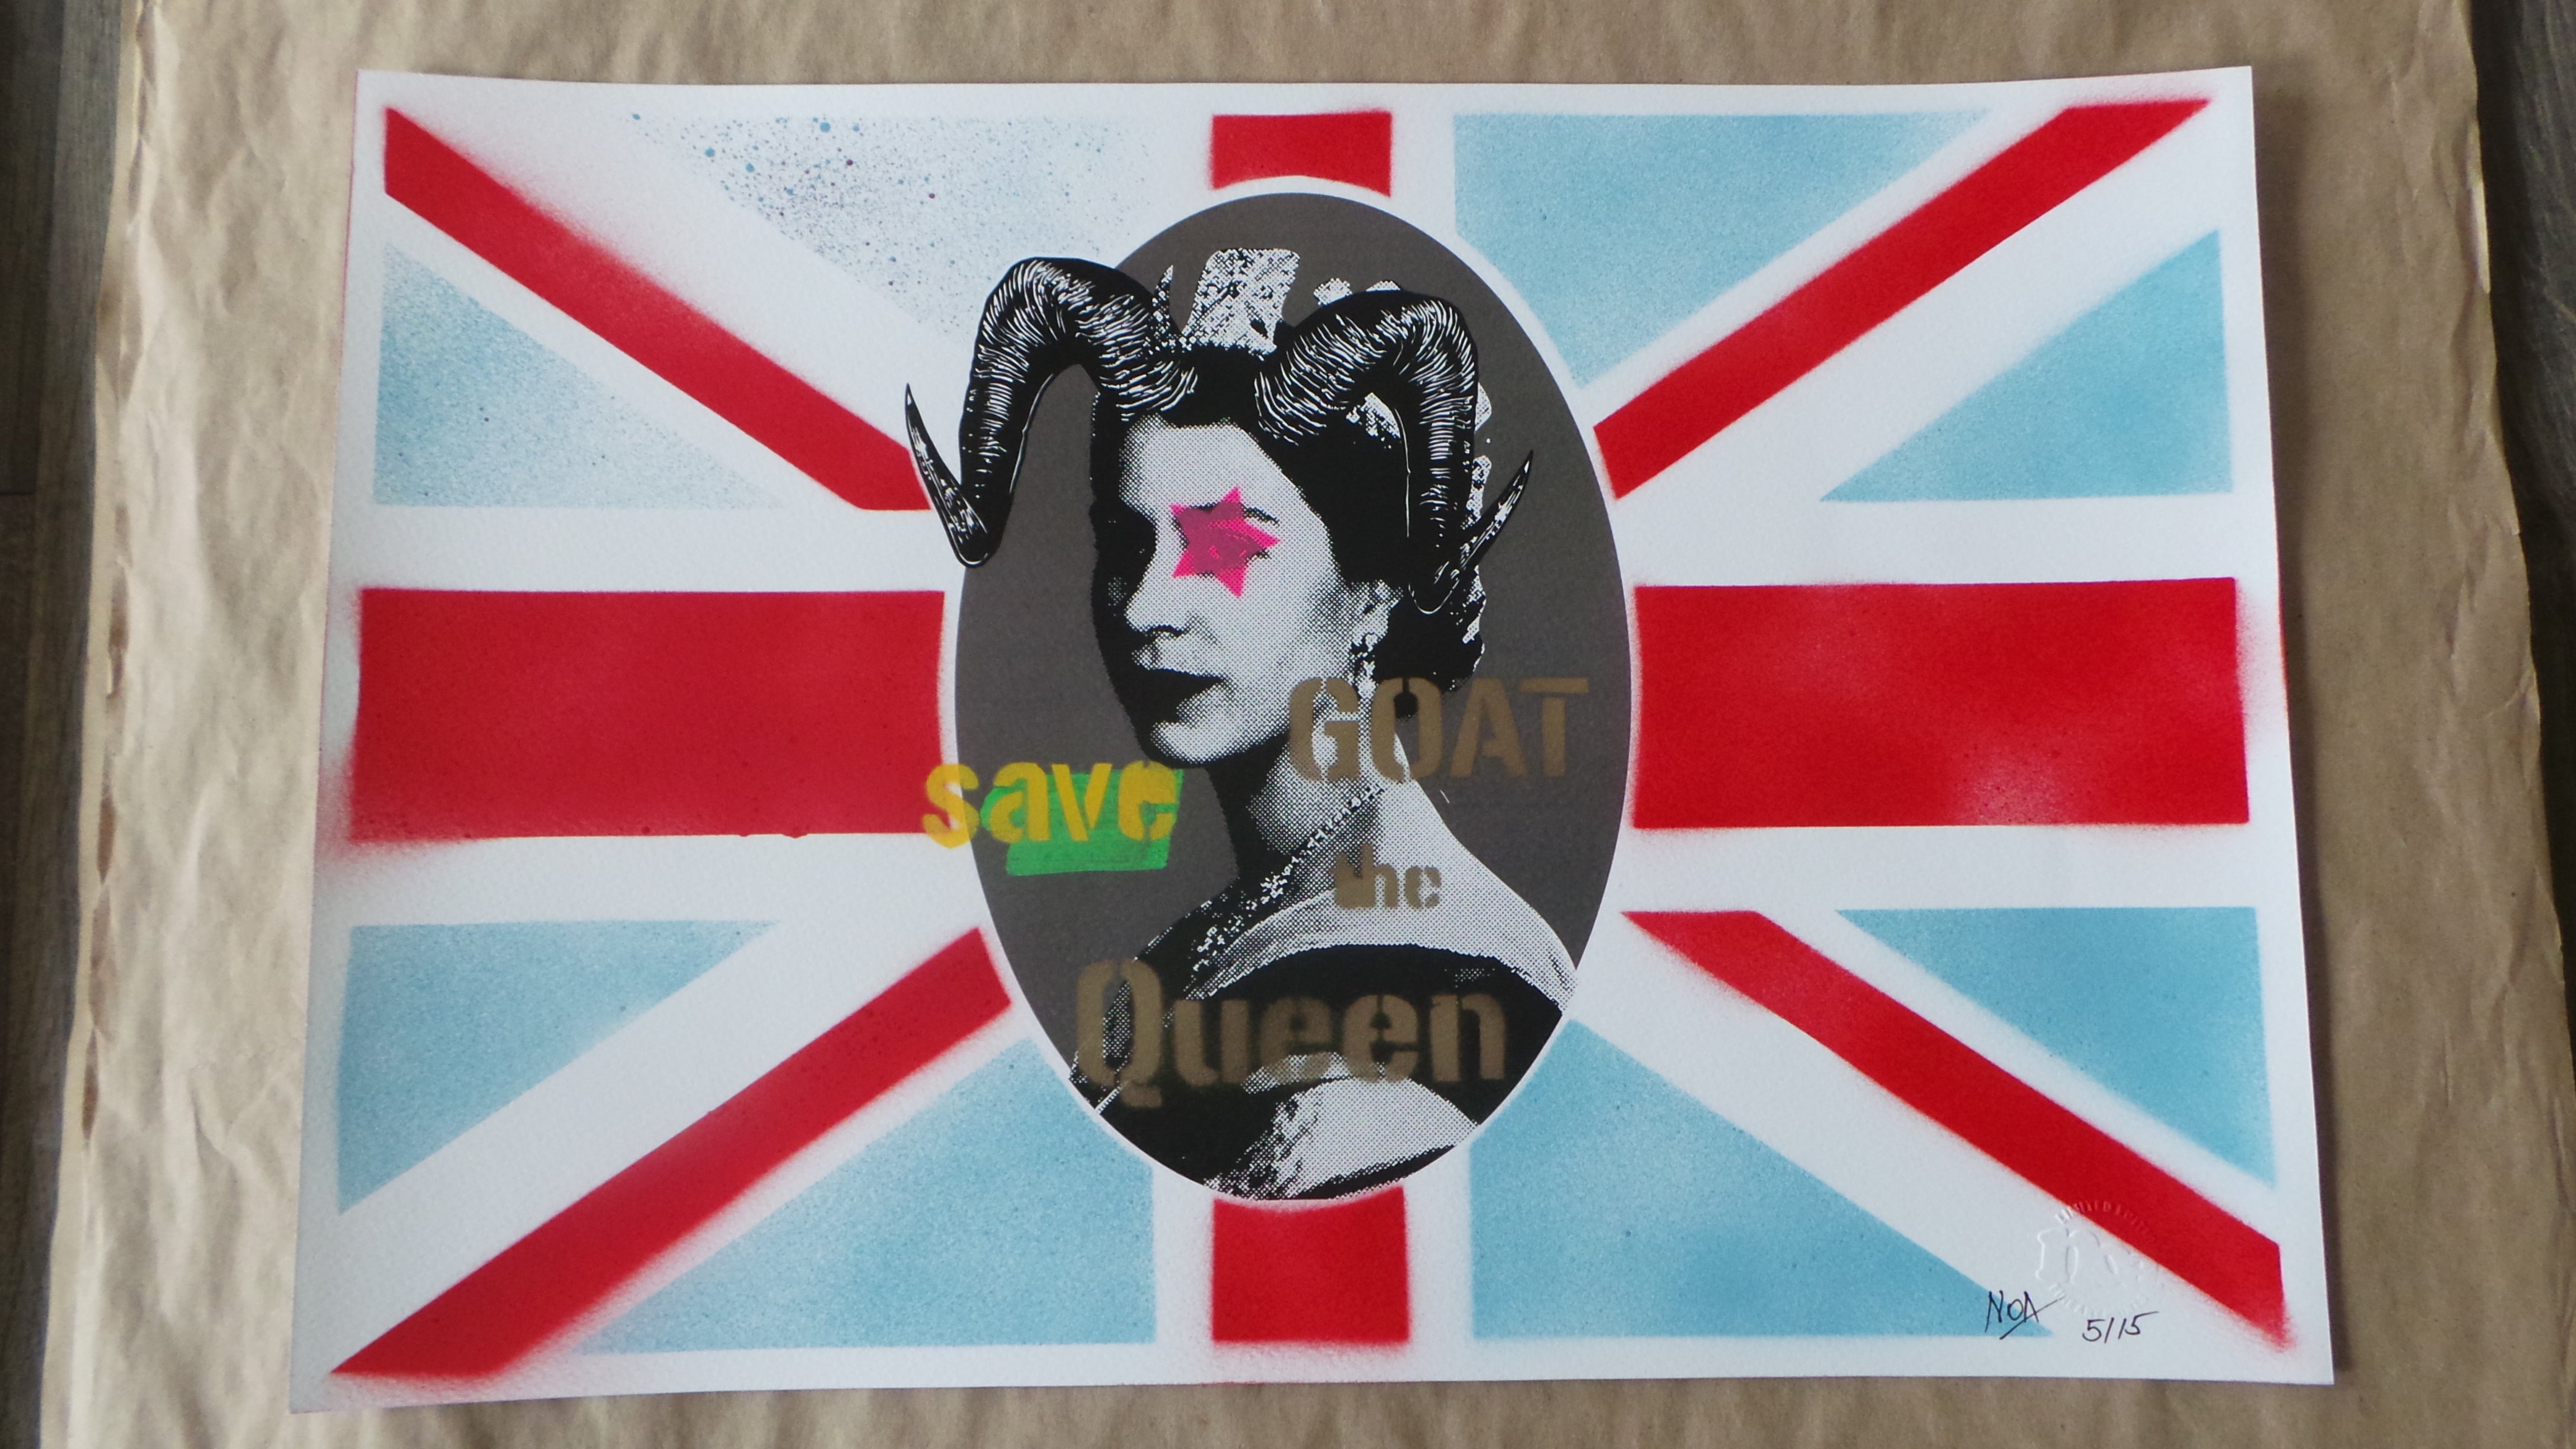 Title:  "GOAT SAVE THE QUEEN" REGULAR  Artist:  NOA prints  Edition: 2015 Limited Edition Screen Printed Poster of 15, signed and numbered by the artist  Type: Screen print poster, Giclee/Stencil/Spraypaint print  Size: 49 x 33 cm  Notes:   Stored flat in very good condition.  Check out our other listings for more hard-to-find and out-of-print posters.